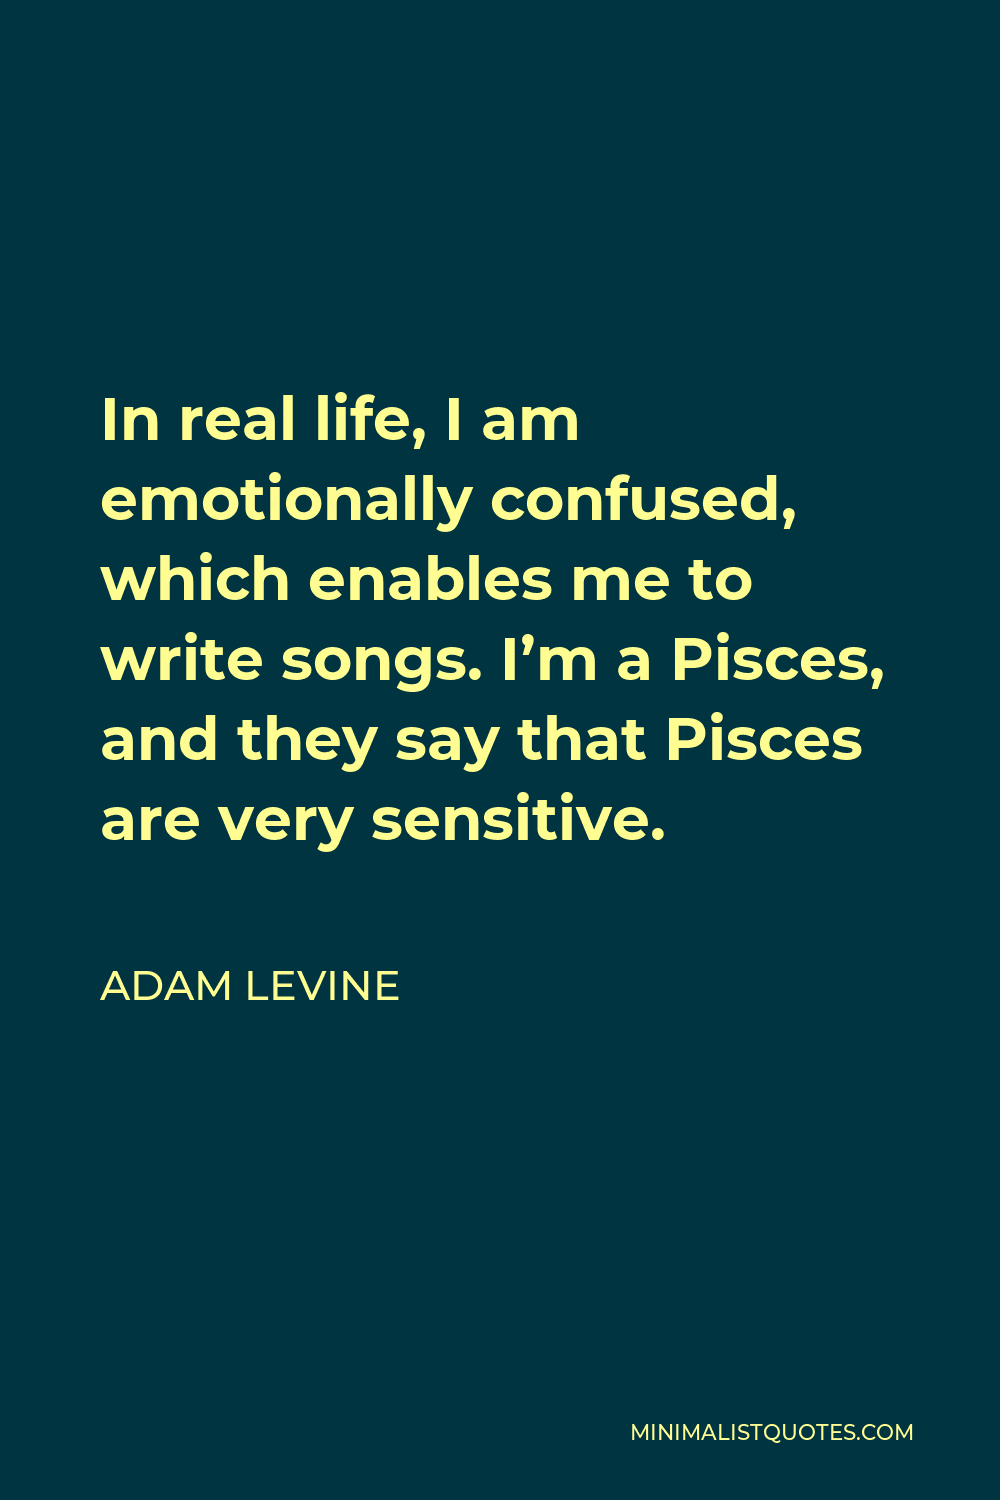 Adam Levine Quote - In real life, I am emotionally confused, which enables me to write songs. I’m a Pisces, and they say that Pisces are very sensitive.